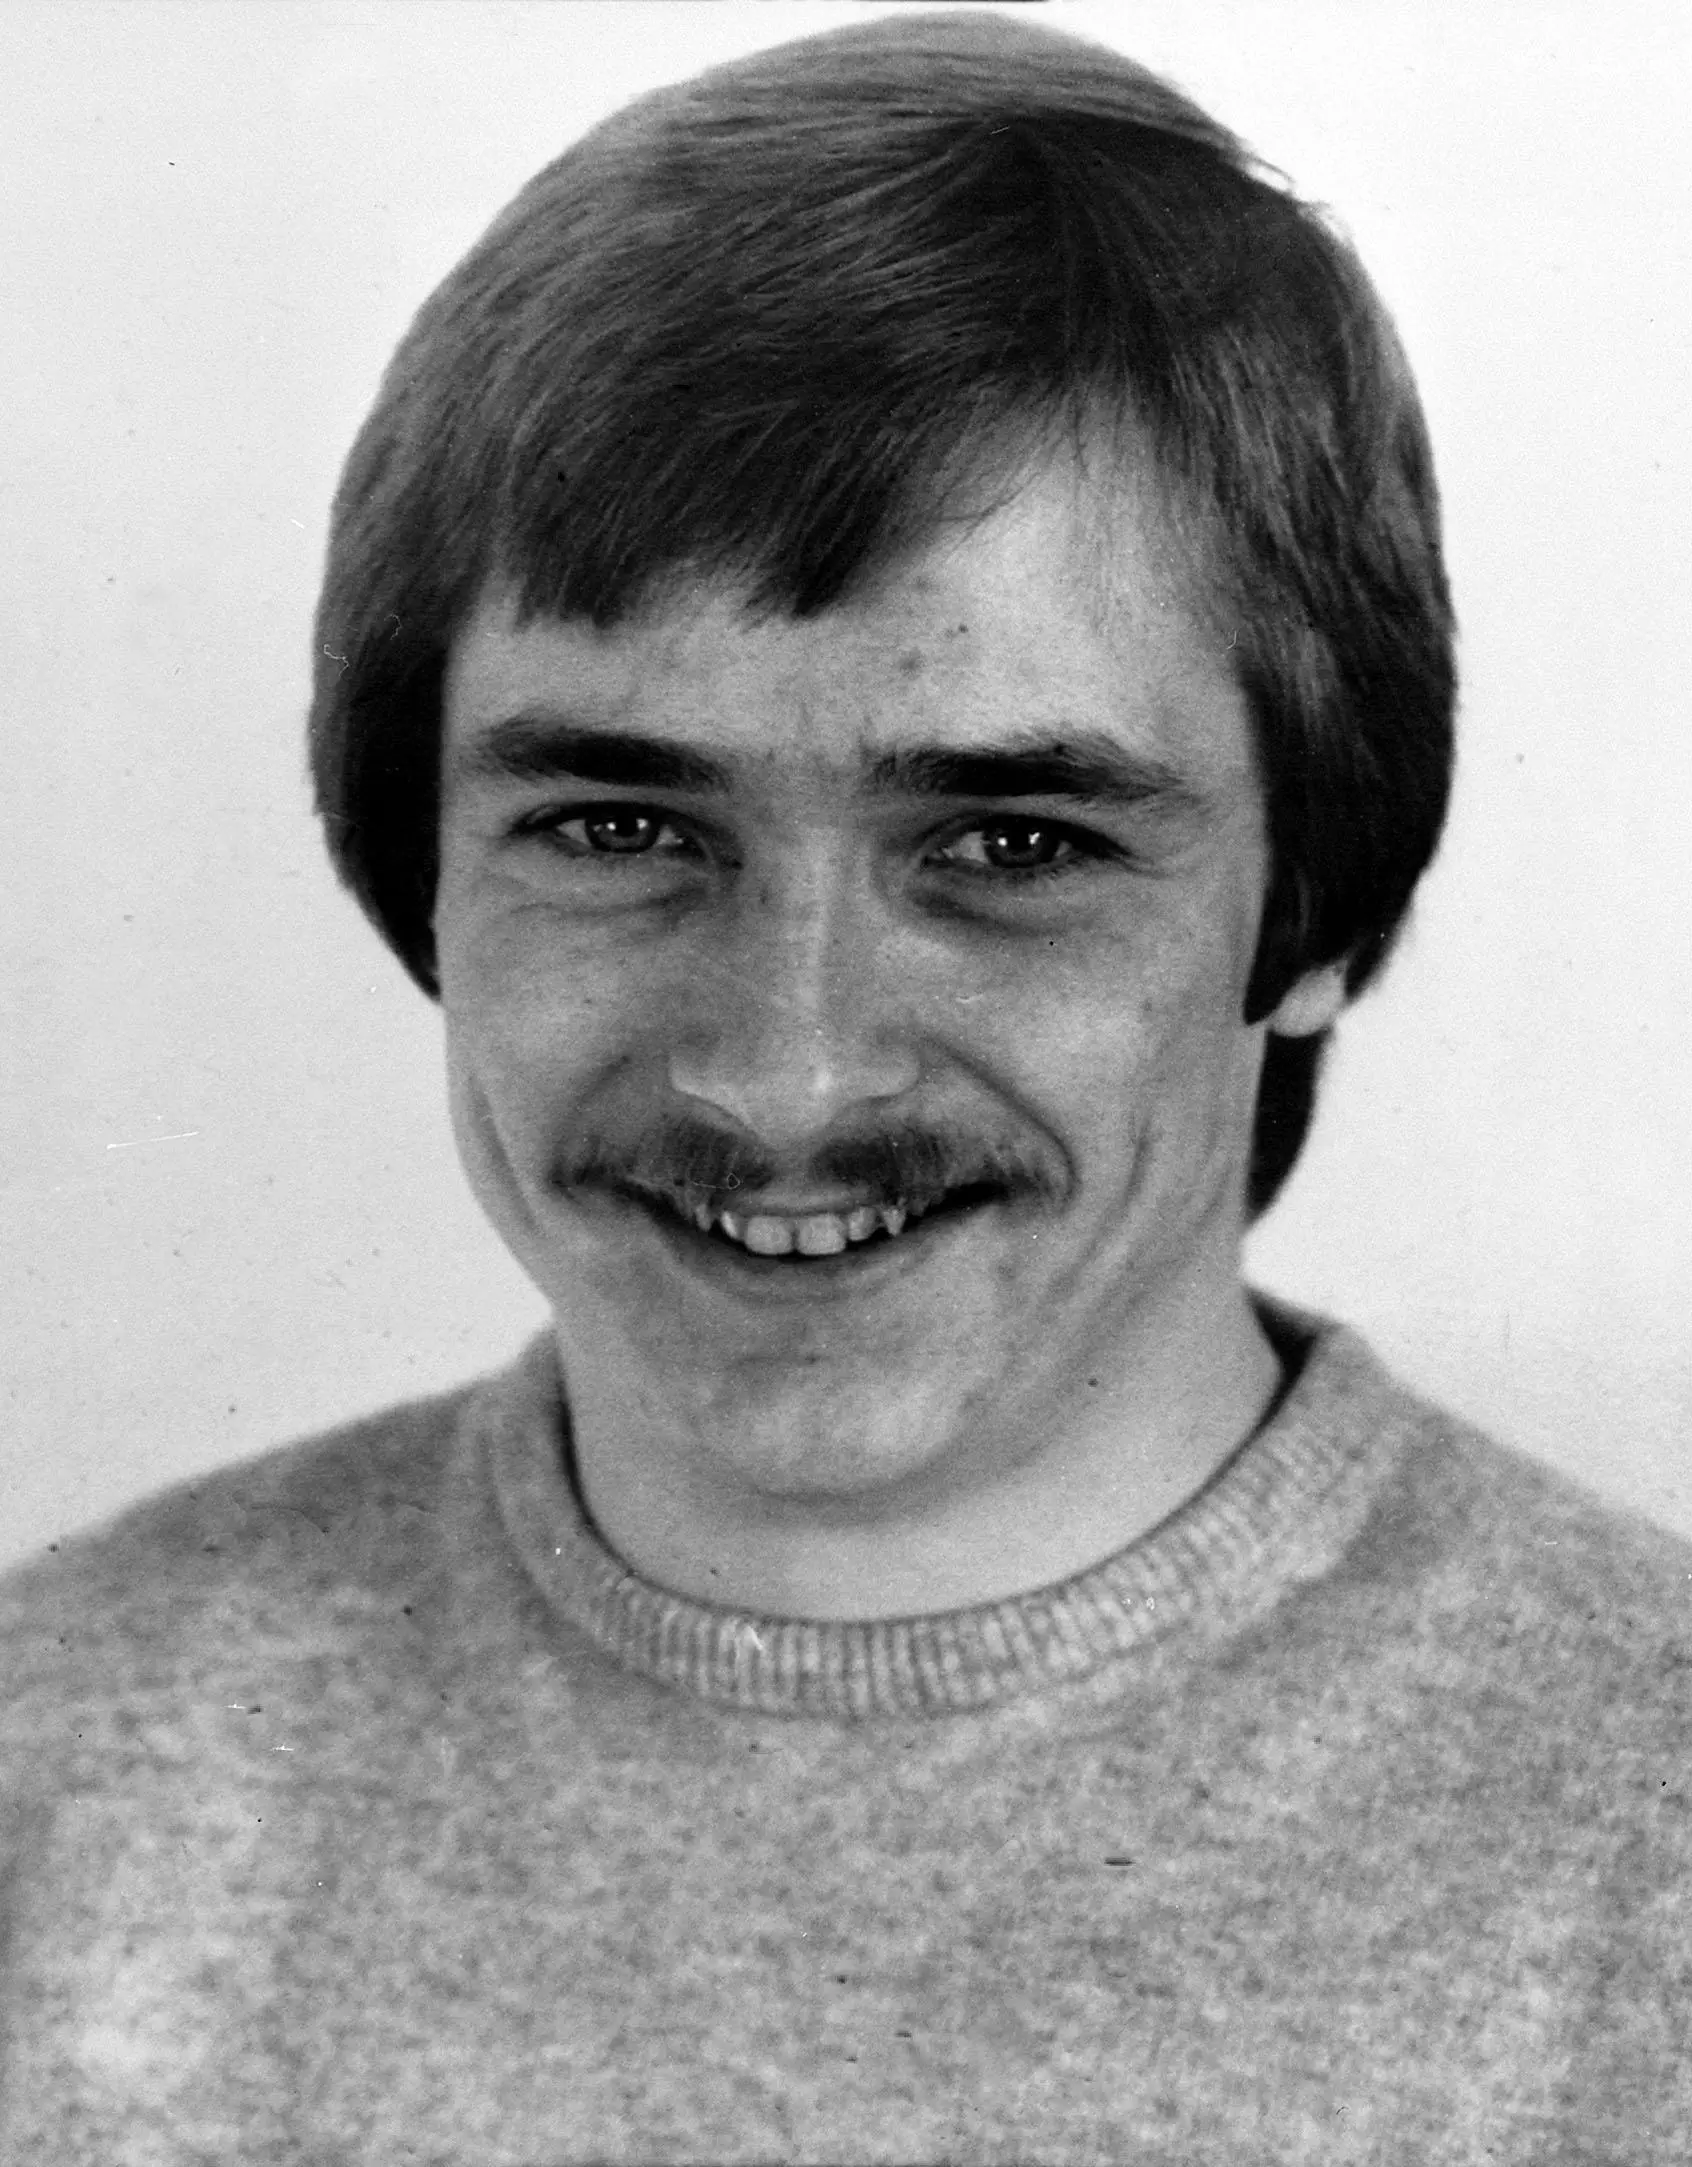 Russell Bishop pictured in 1987 (